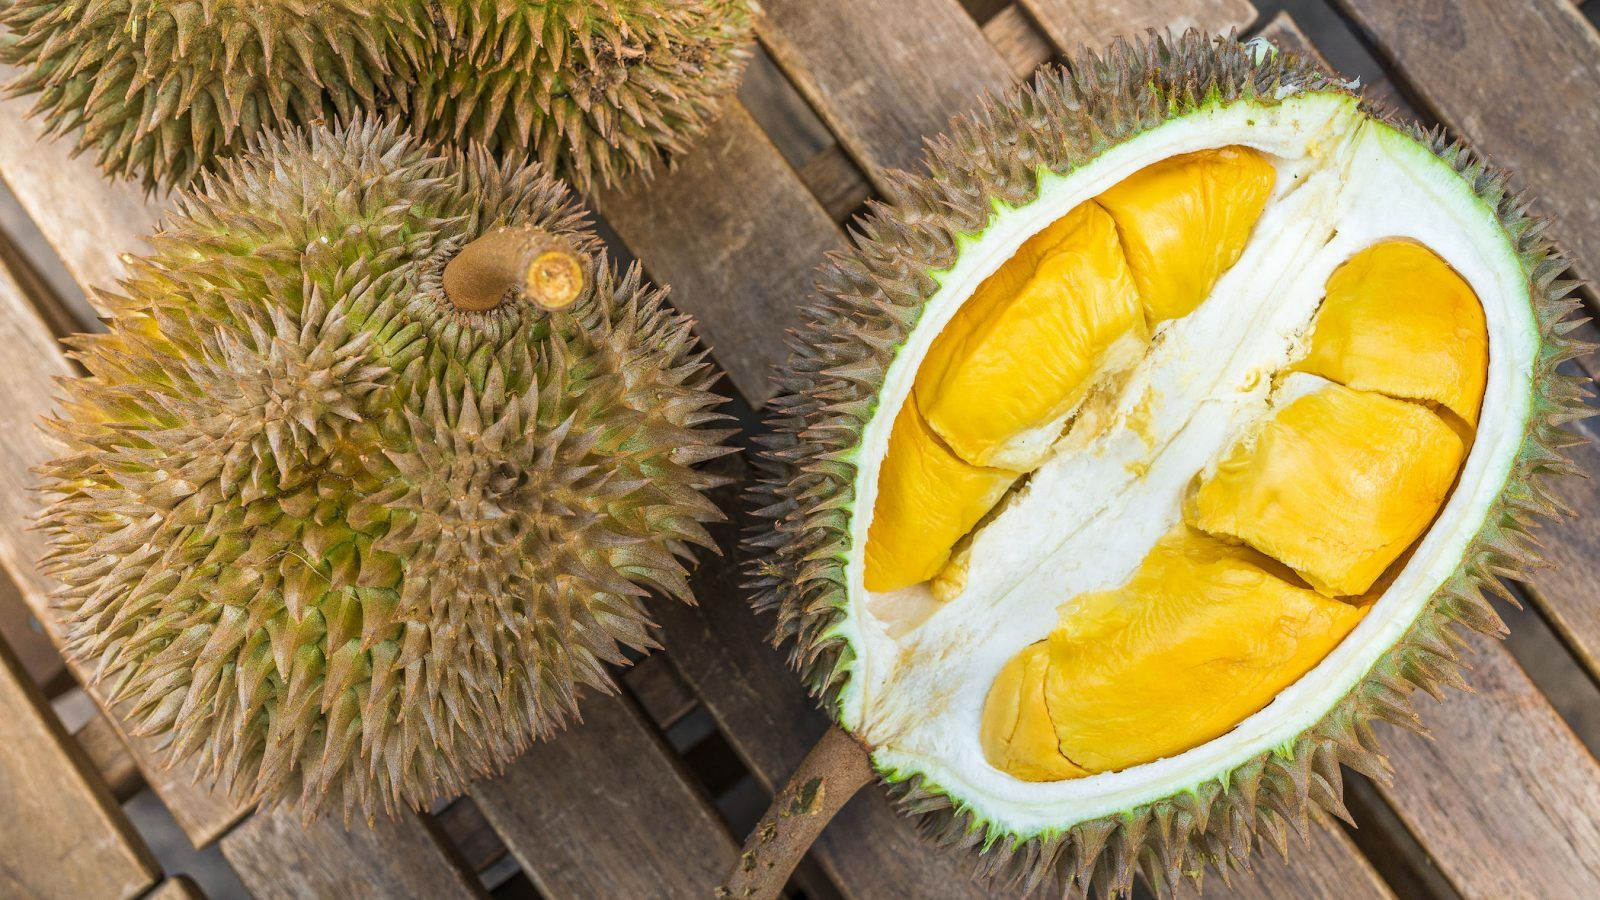 In season: 9 best durian delivery services in Singapore